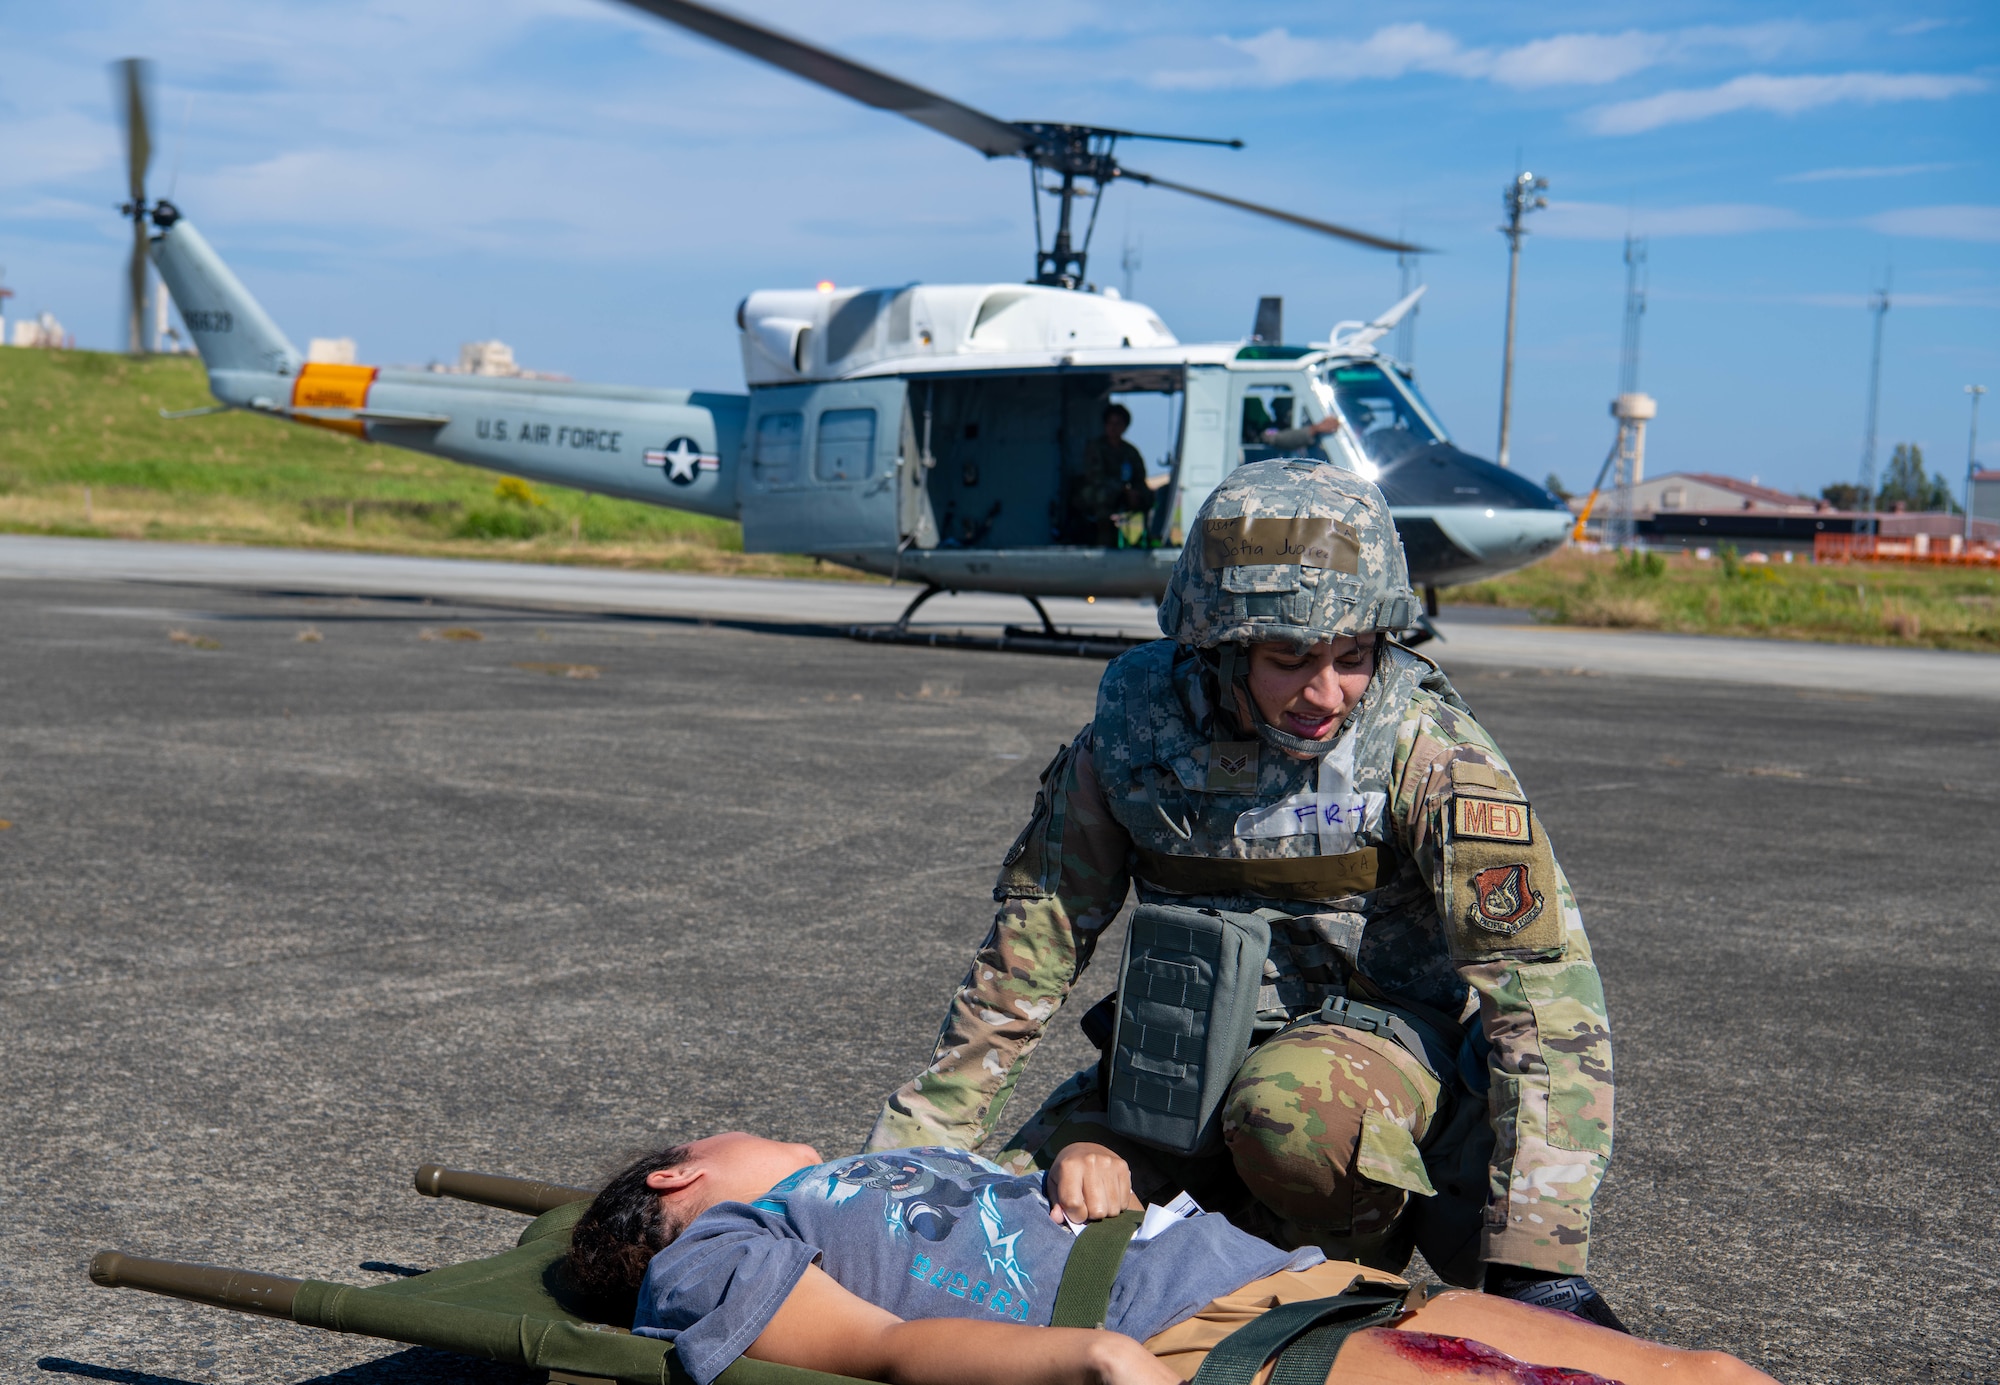 An Airman gives aid to a simulated patient